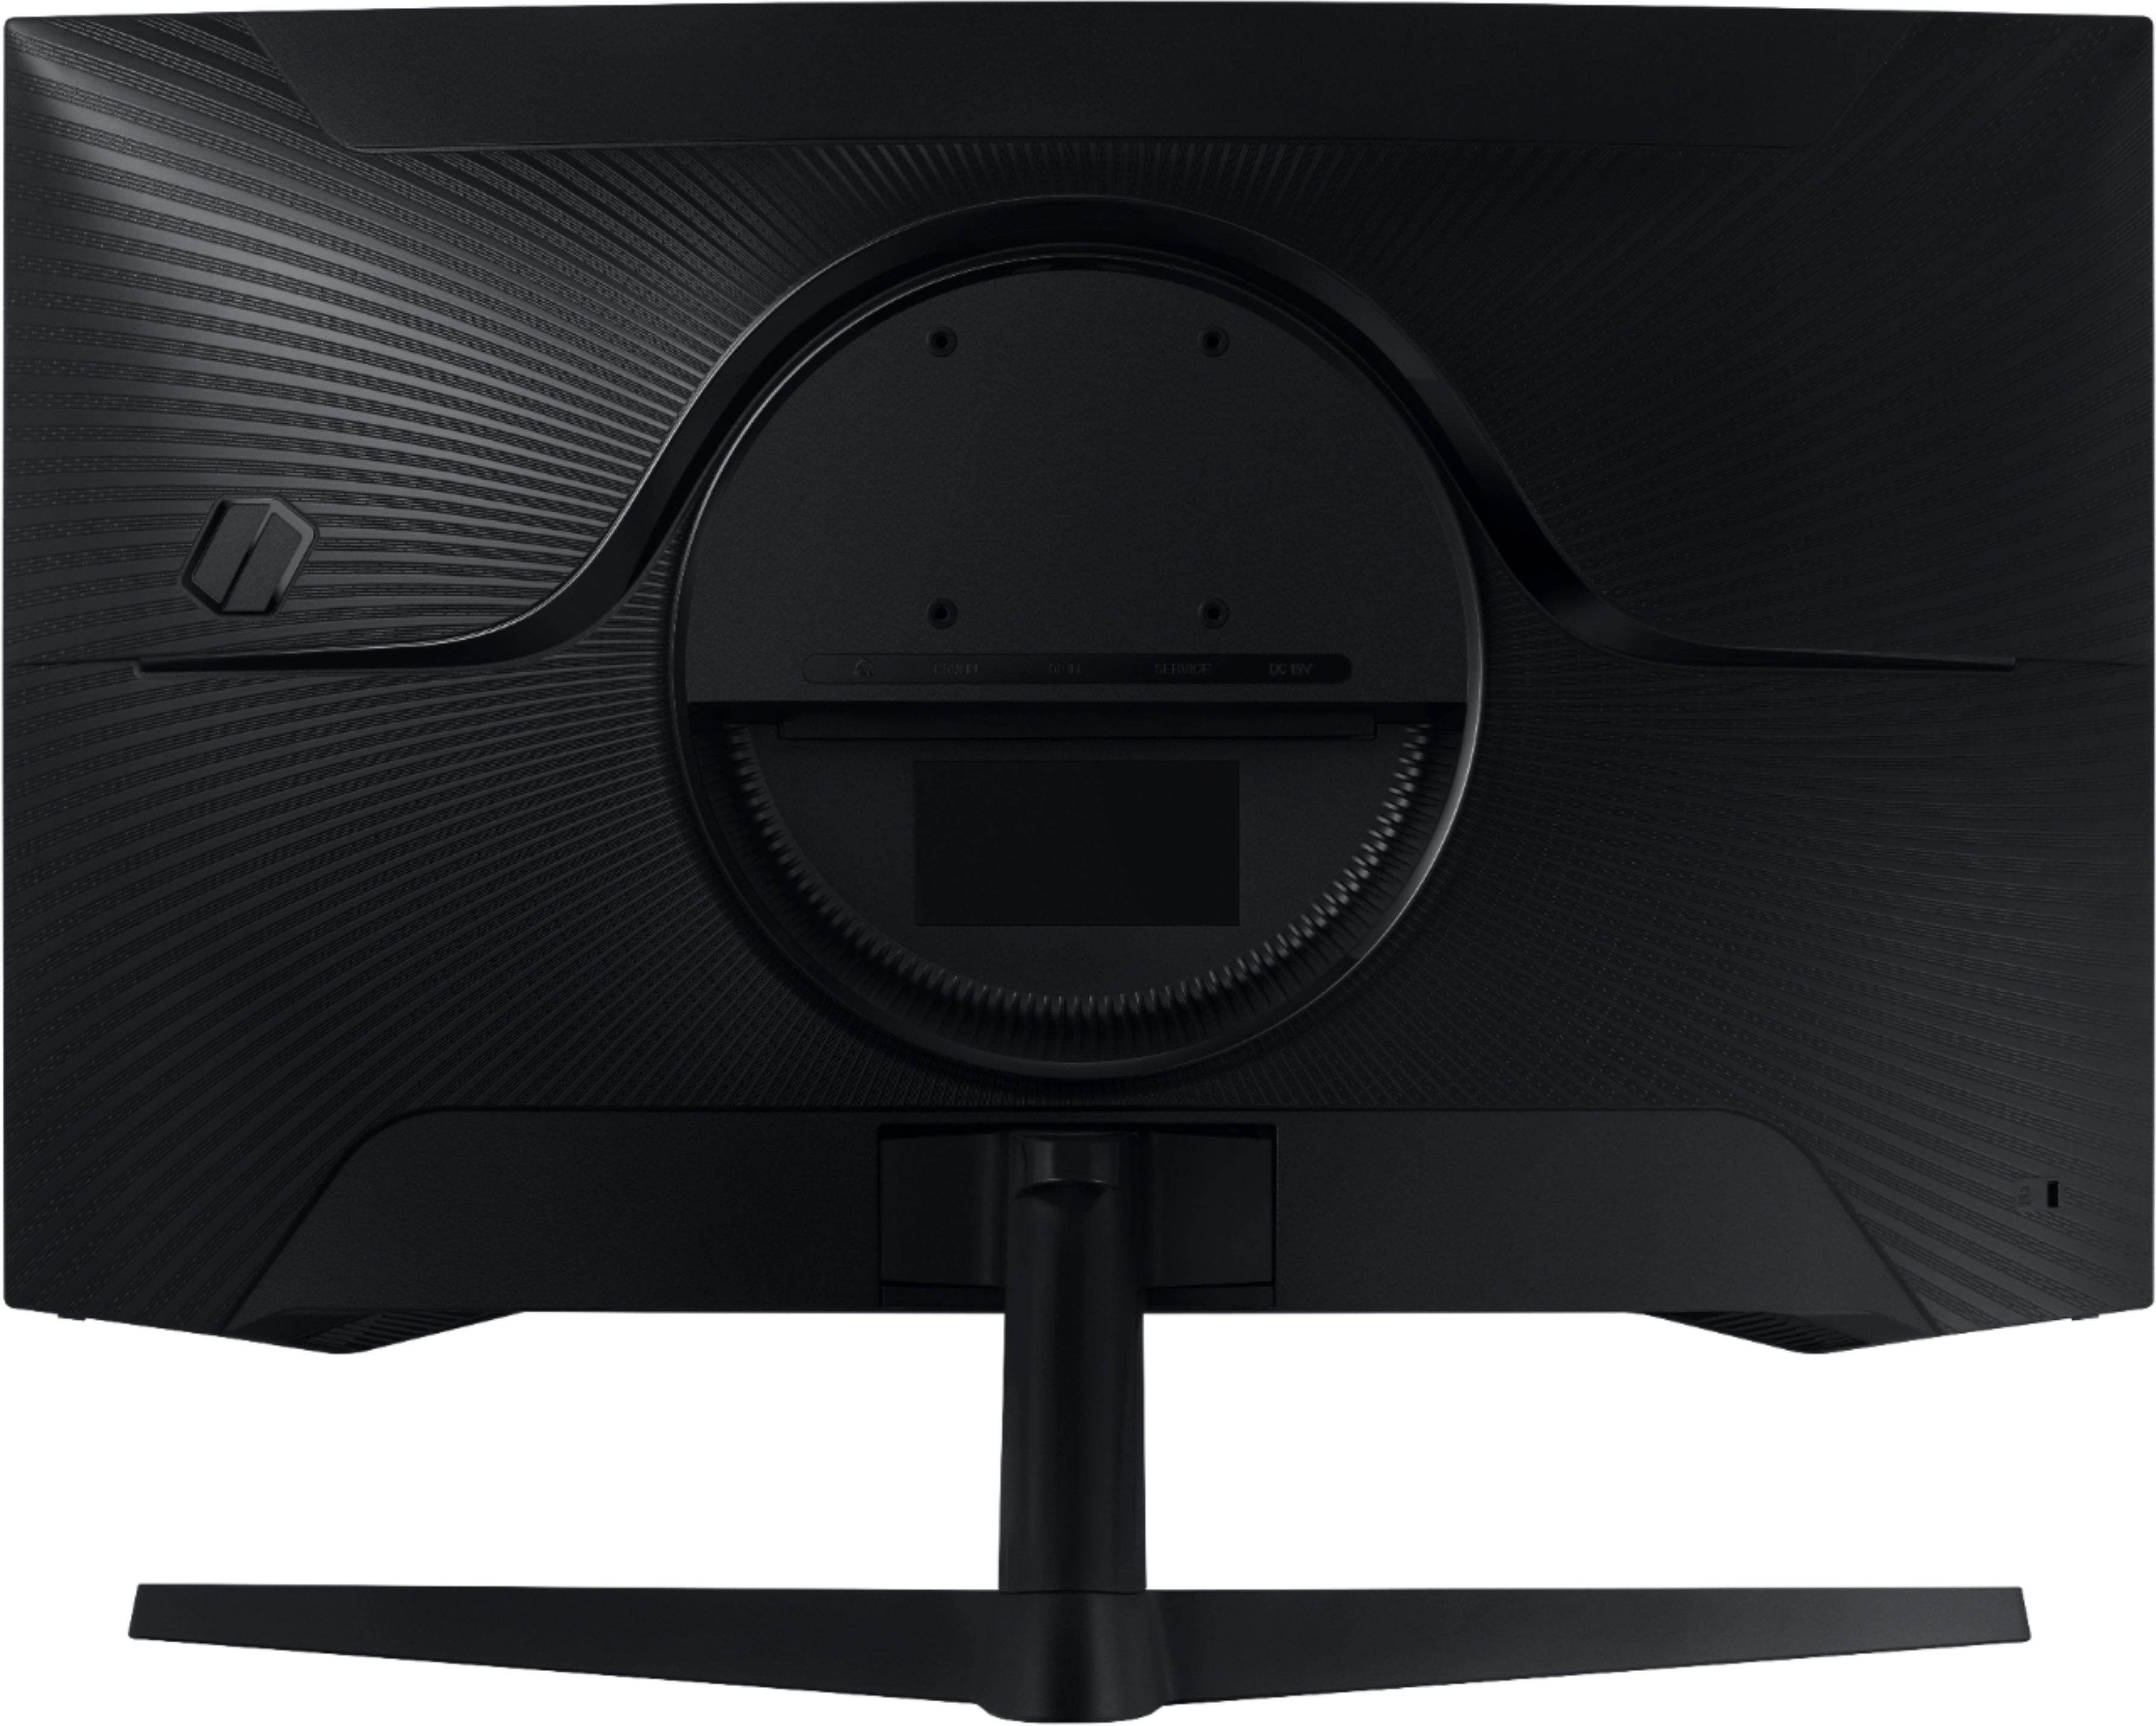 Back View: Samsung - Geek Squad Certified Refurbished Odyssey Neo 49" LED Curved FreeSync and G-SYNC Compatable Monitor with HDR - Black